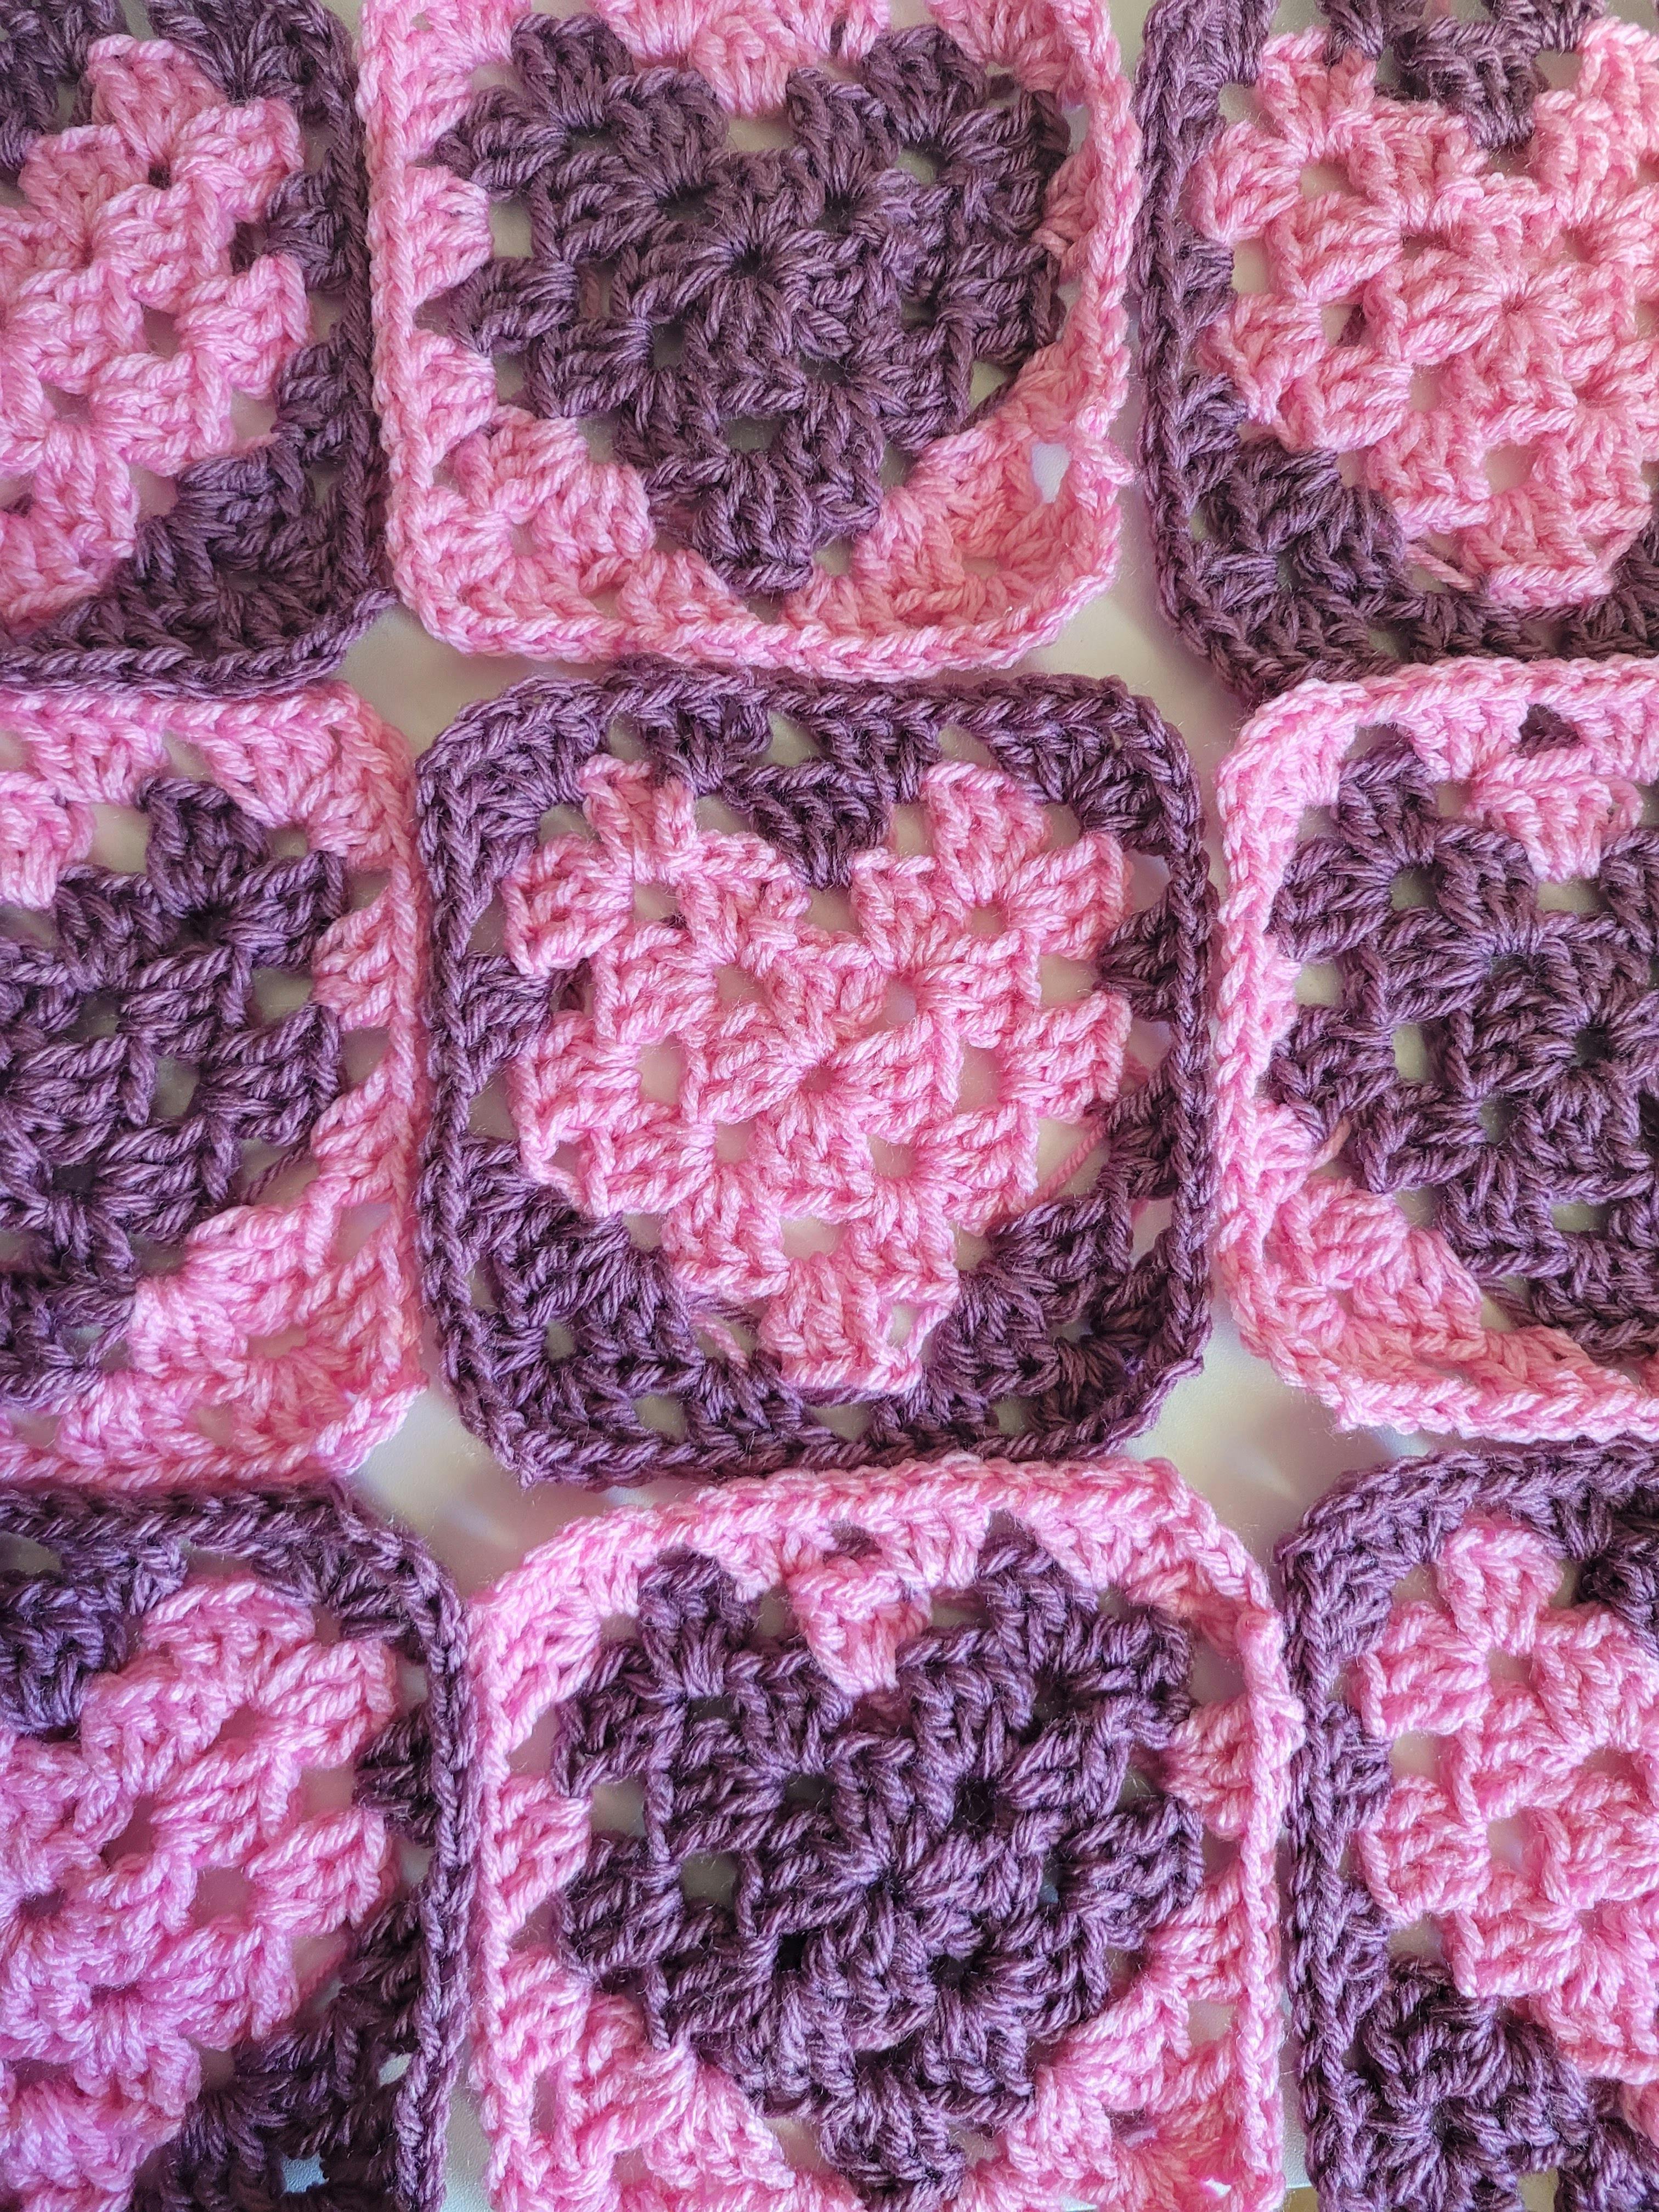 How to Crochet a Heart Granny Square